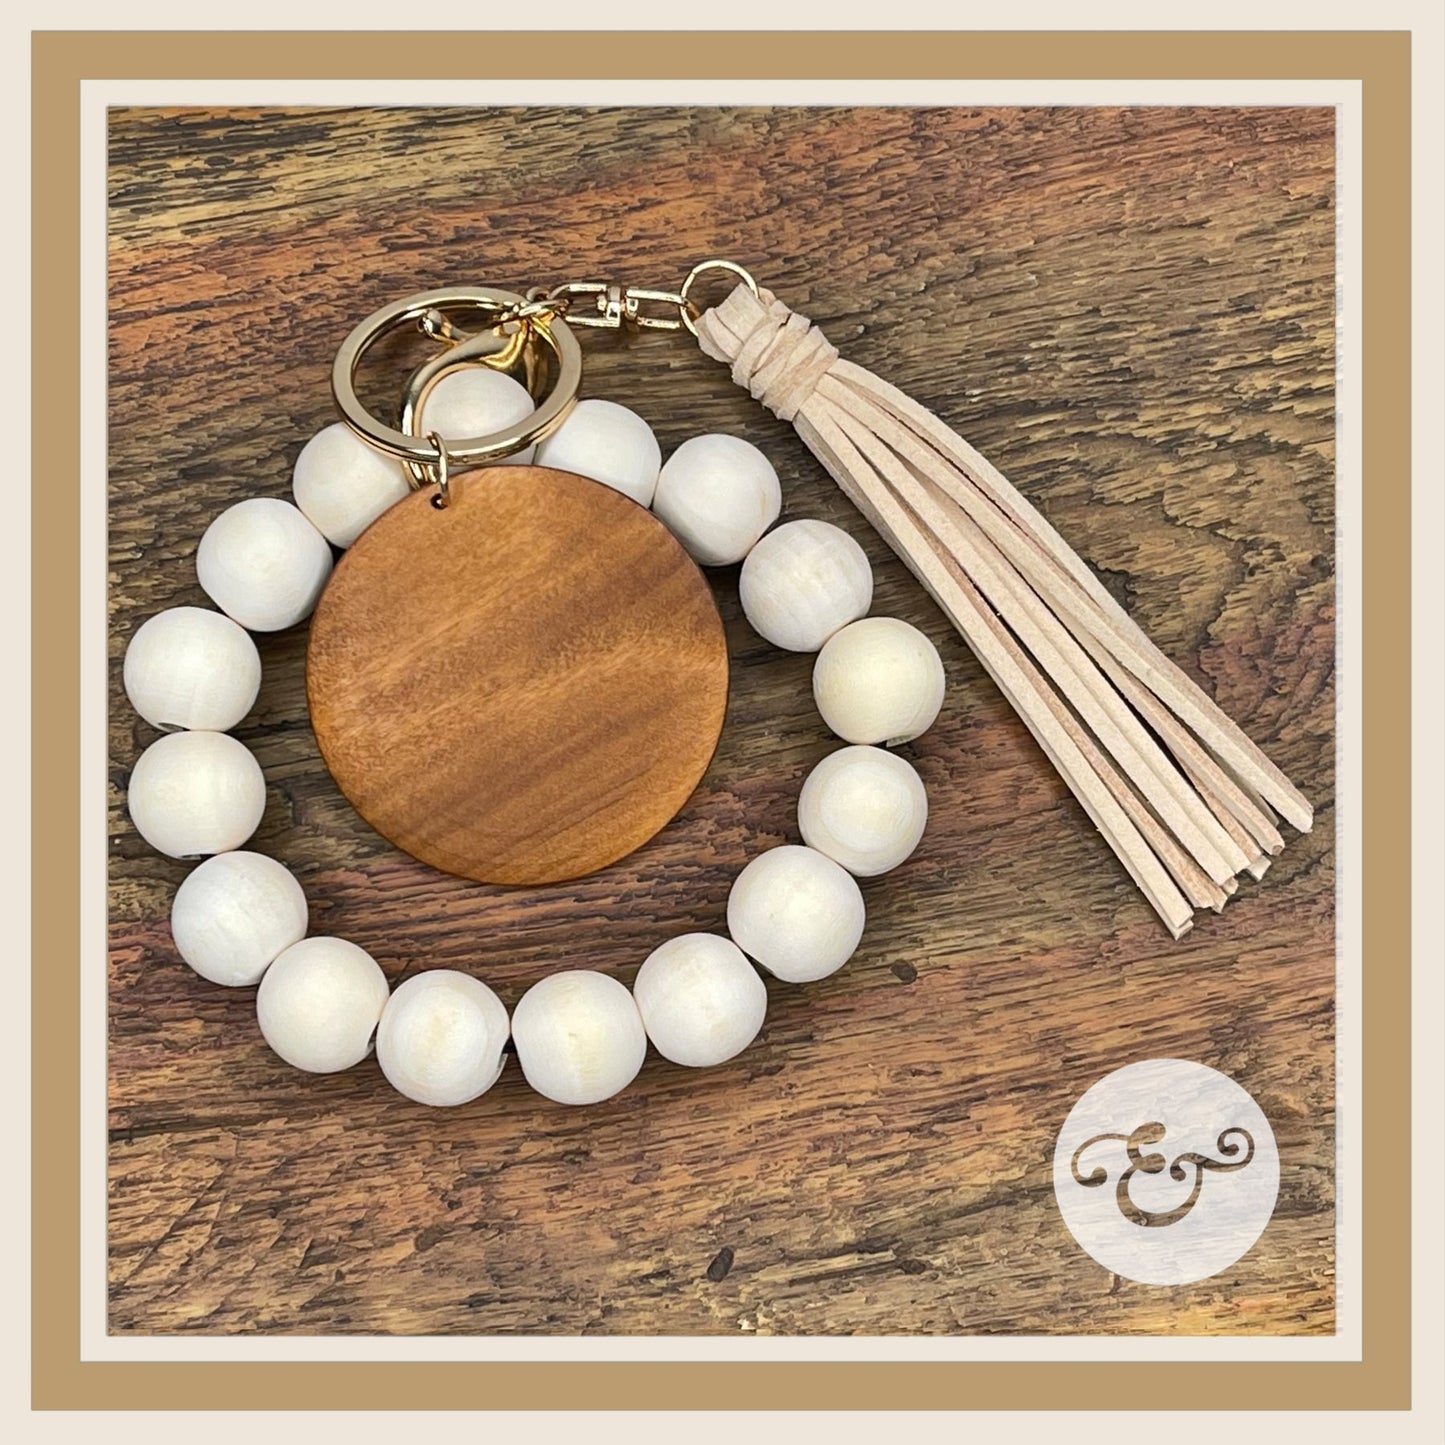 Wooden Bead Wristlets With Suede Tassel (6688691257422) (6688719405134) (6688894517326) (6688895270990) (6690203795534)